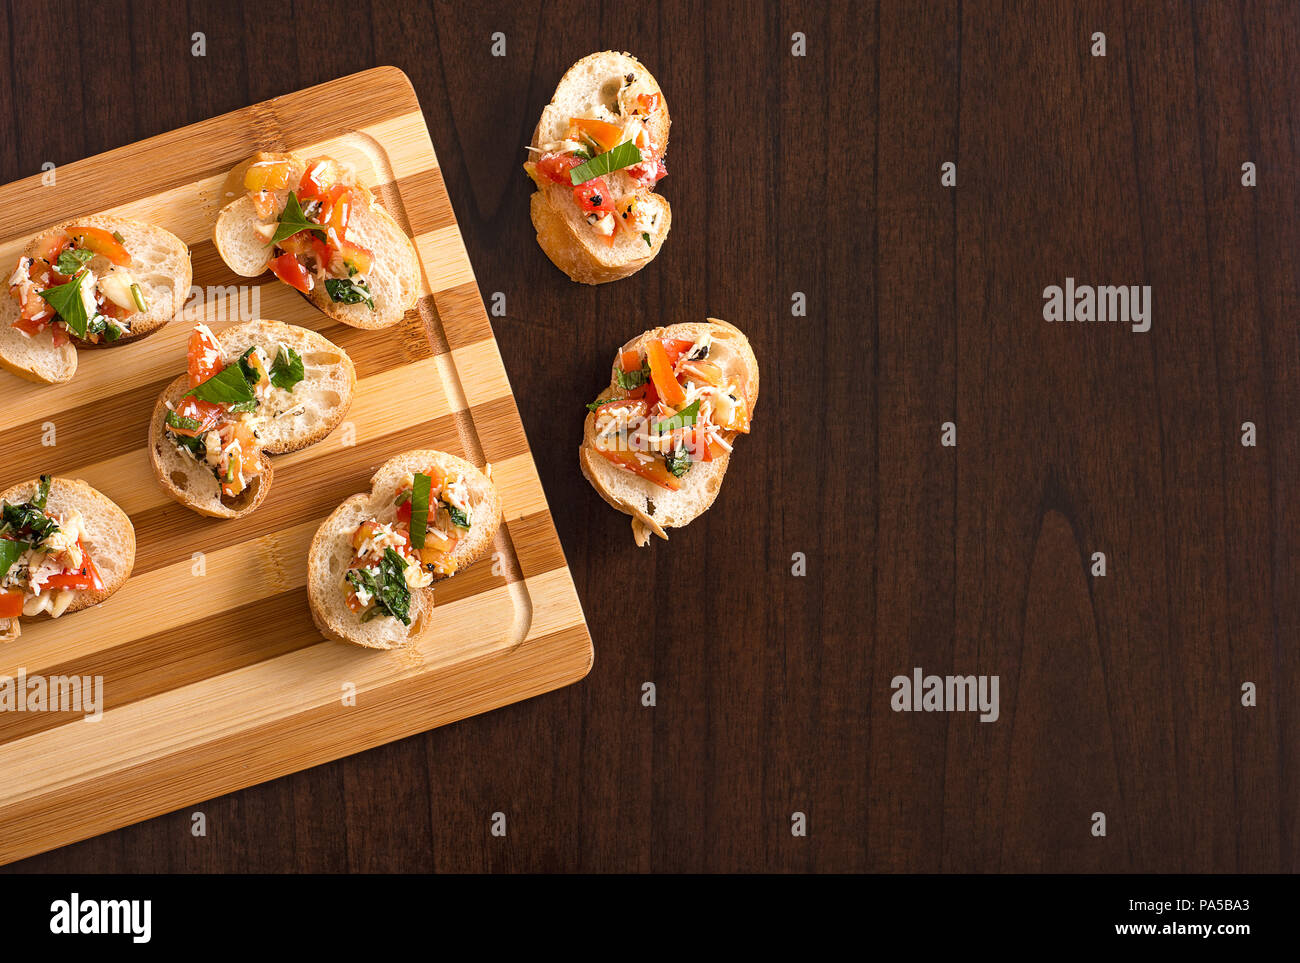 bruschetta on baking tray flat lay image with copy space. Stock Photo